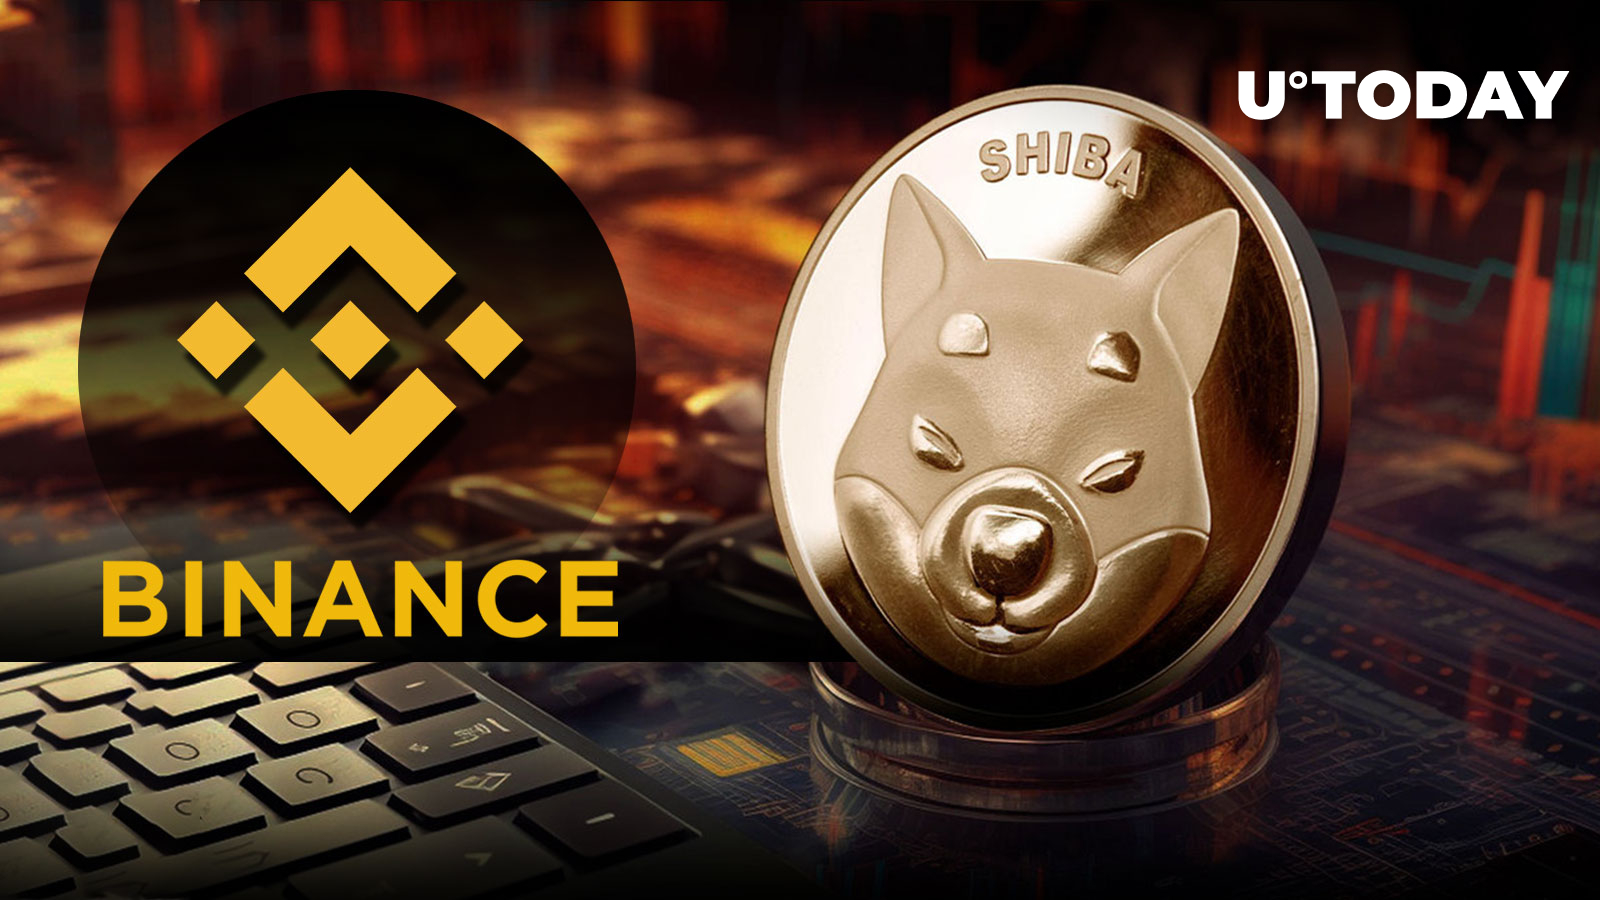 2.28 Trillion Shiba Inu (SHIB) Tokens Moved out of Binance – What’s Happening?